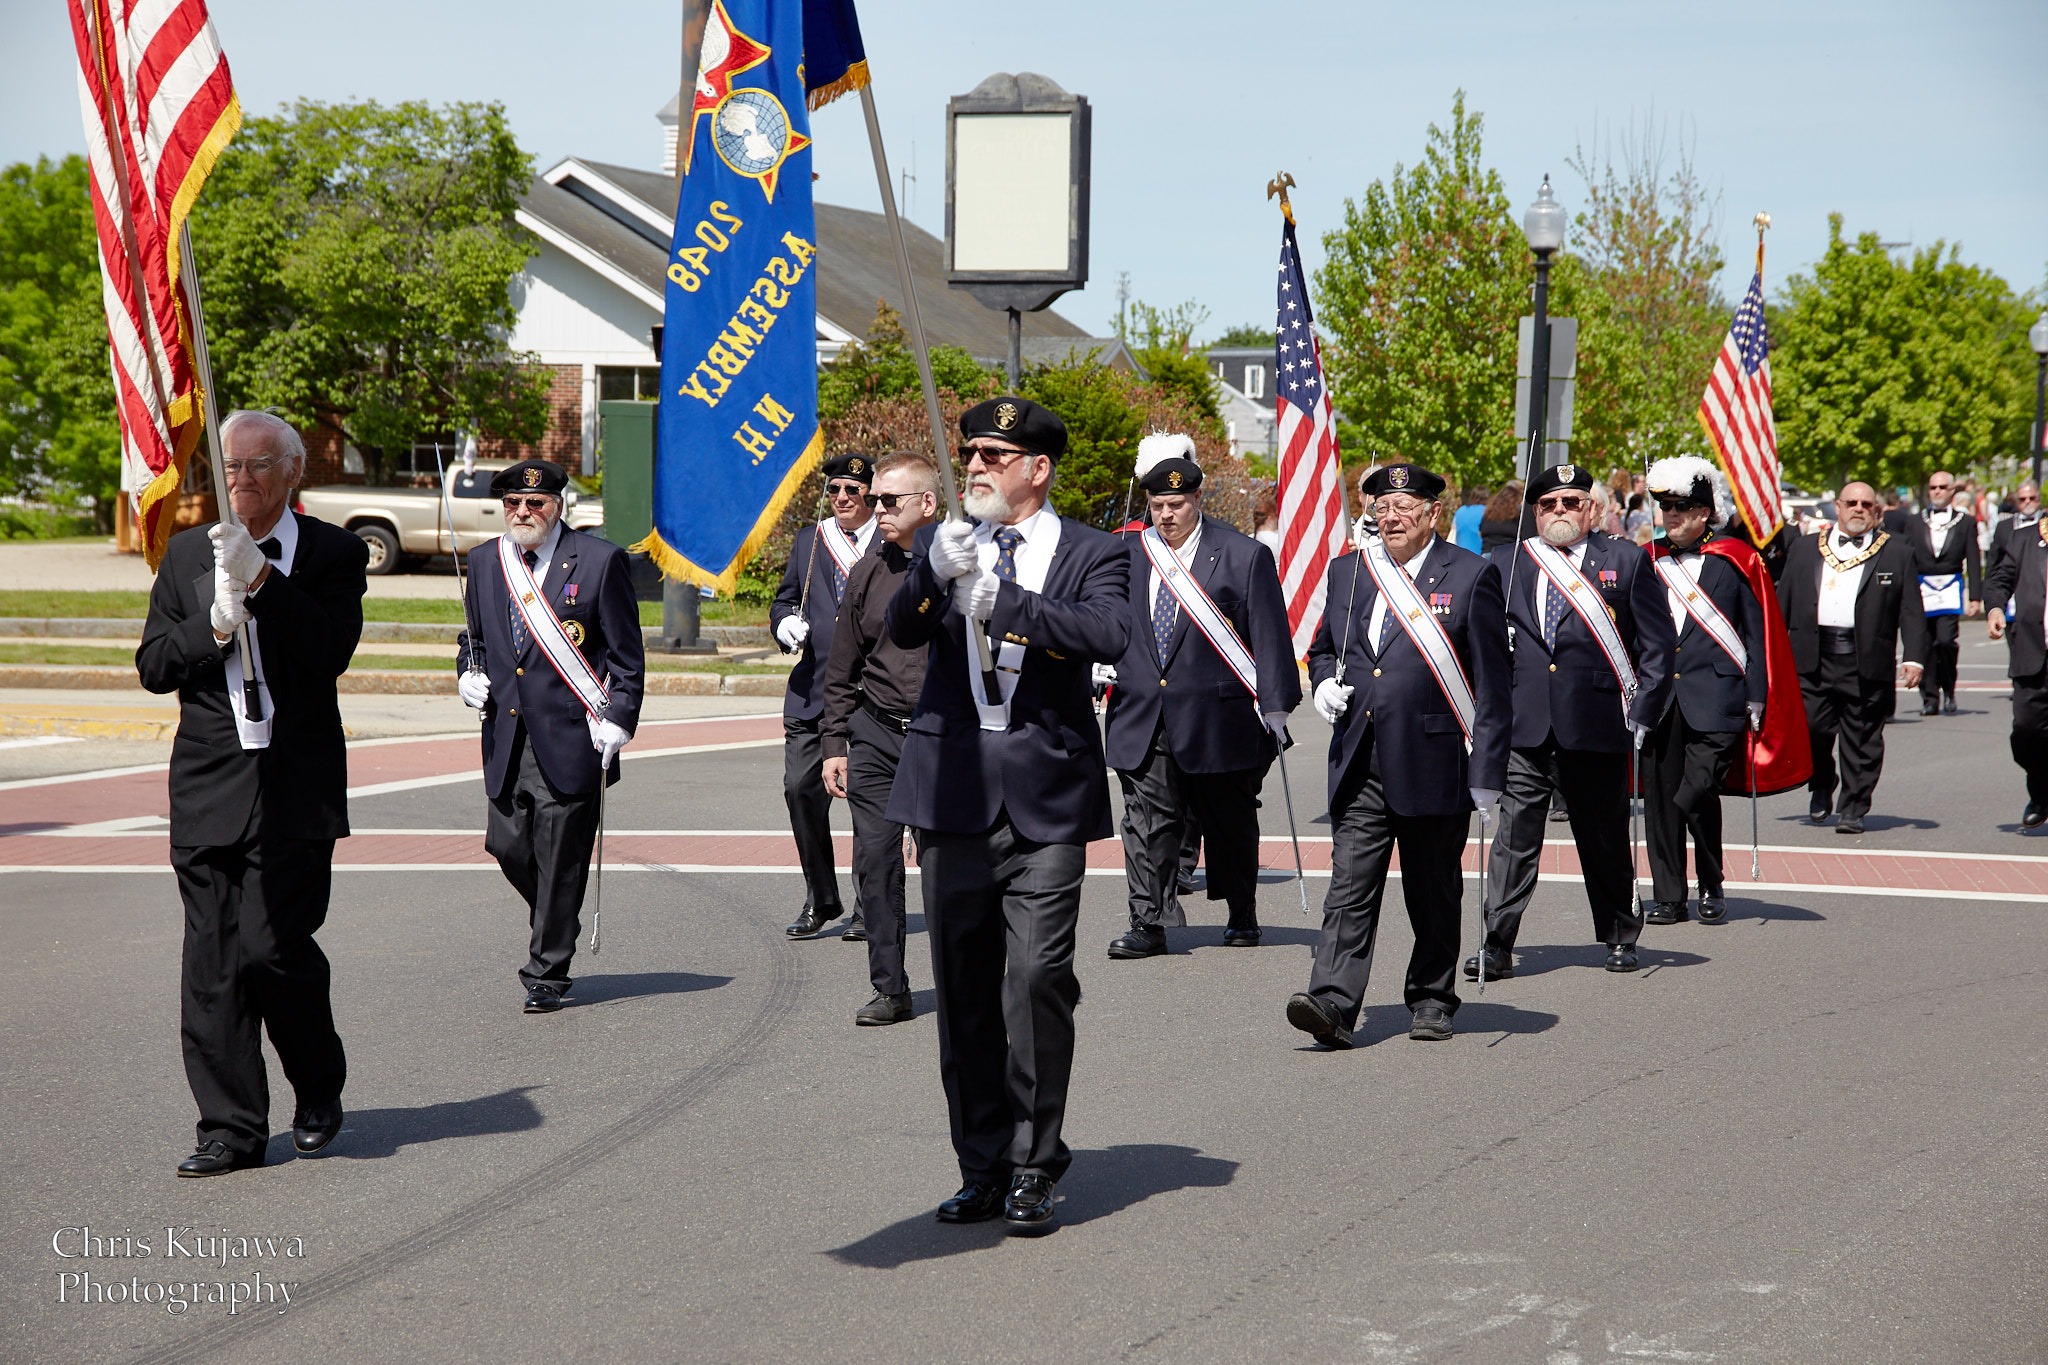 Rochester Veterans Council to host a Memorial Day Parade on 5/29 The